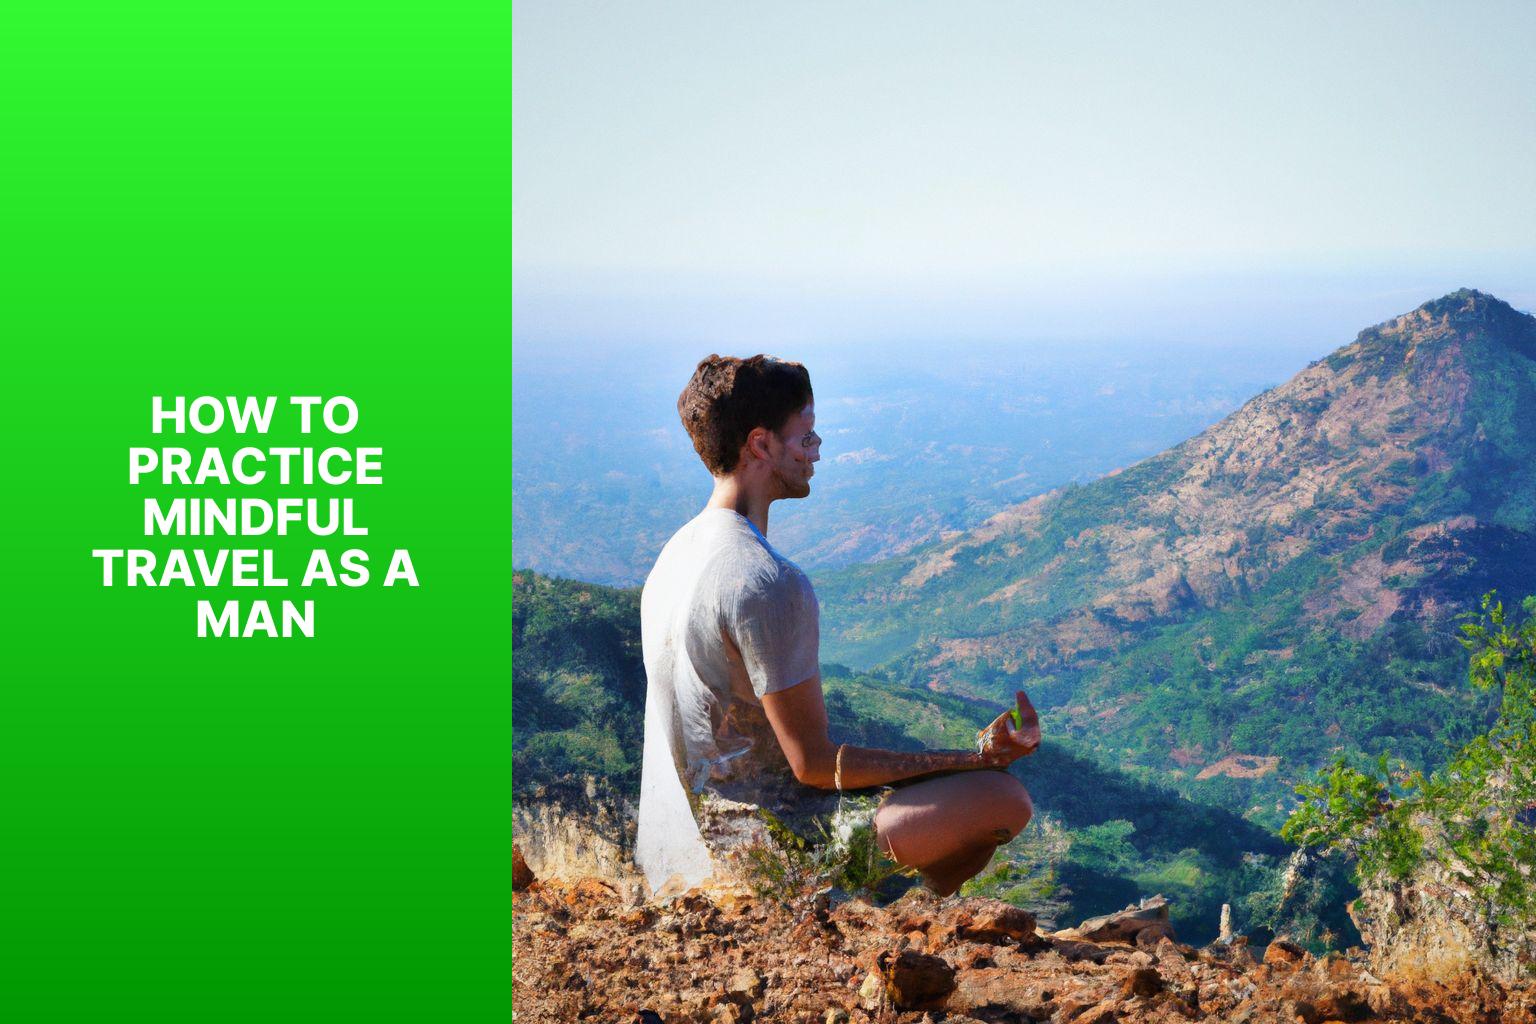 How to Practice Mindful Travel as a Man - Mindful Travel: A Men